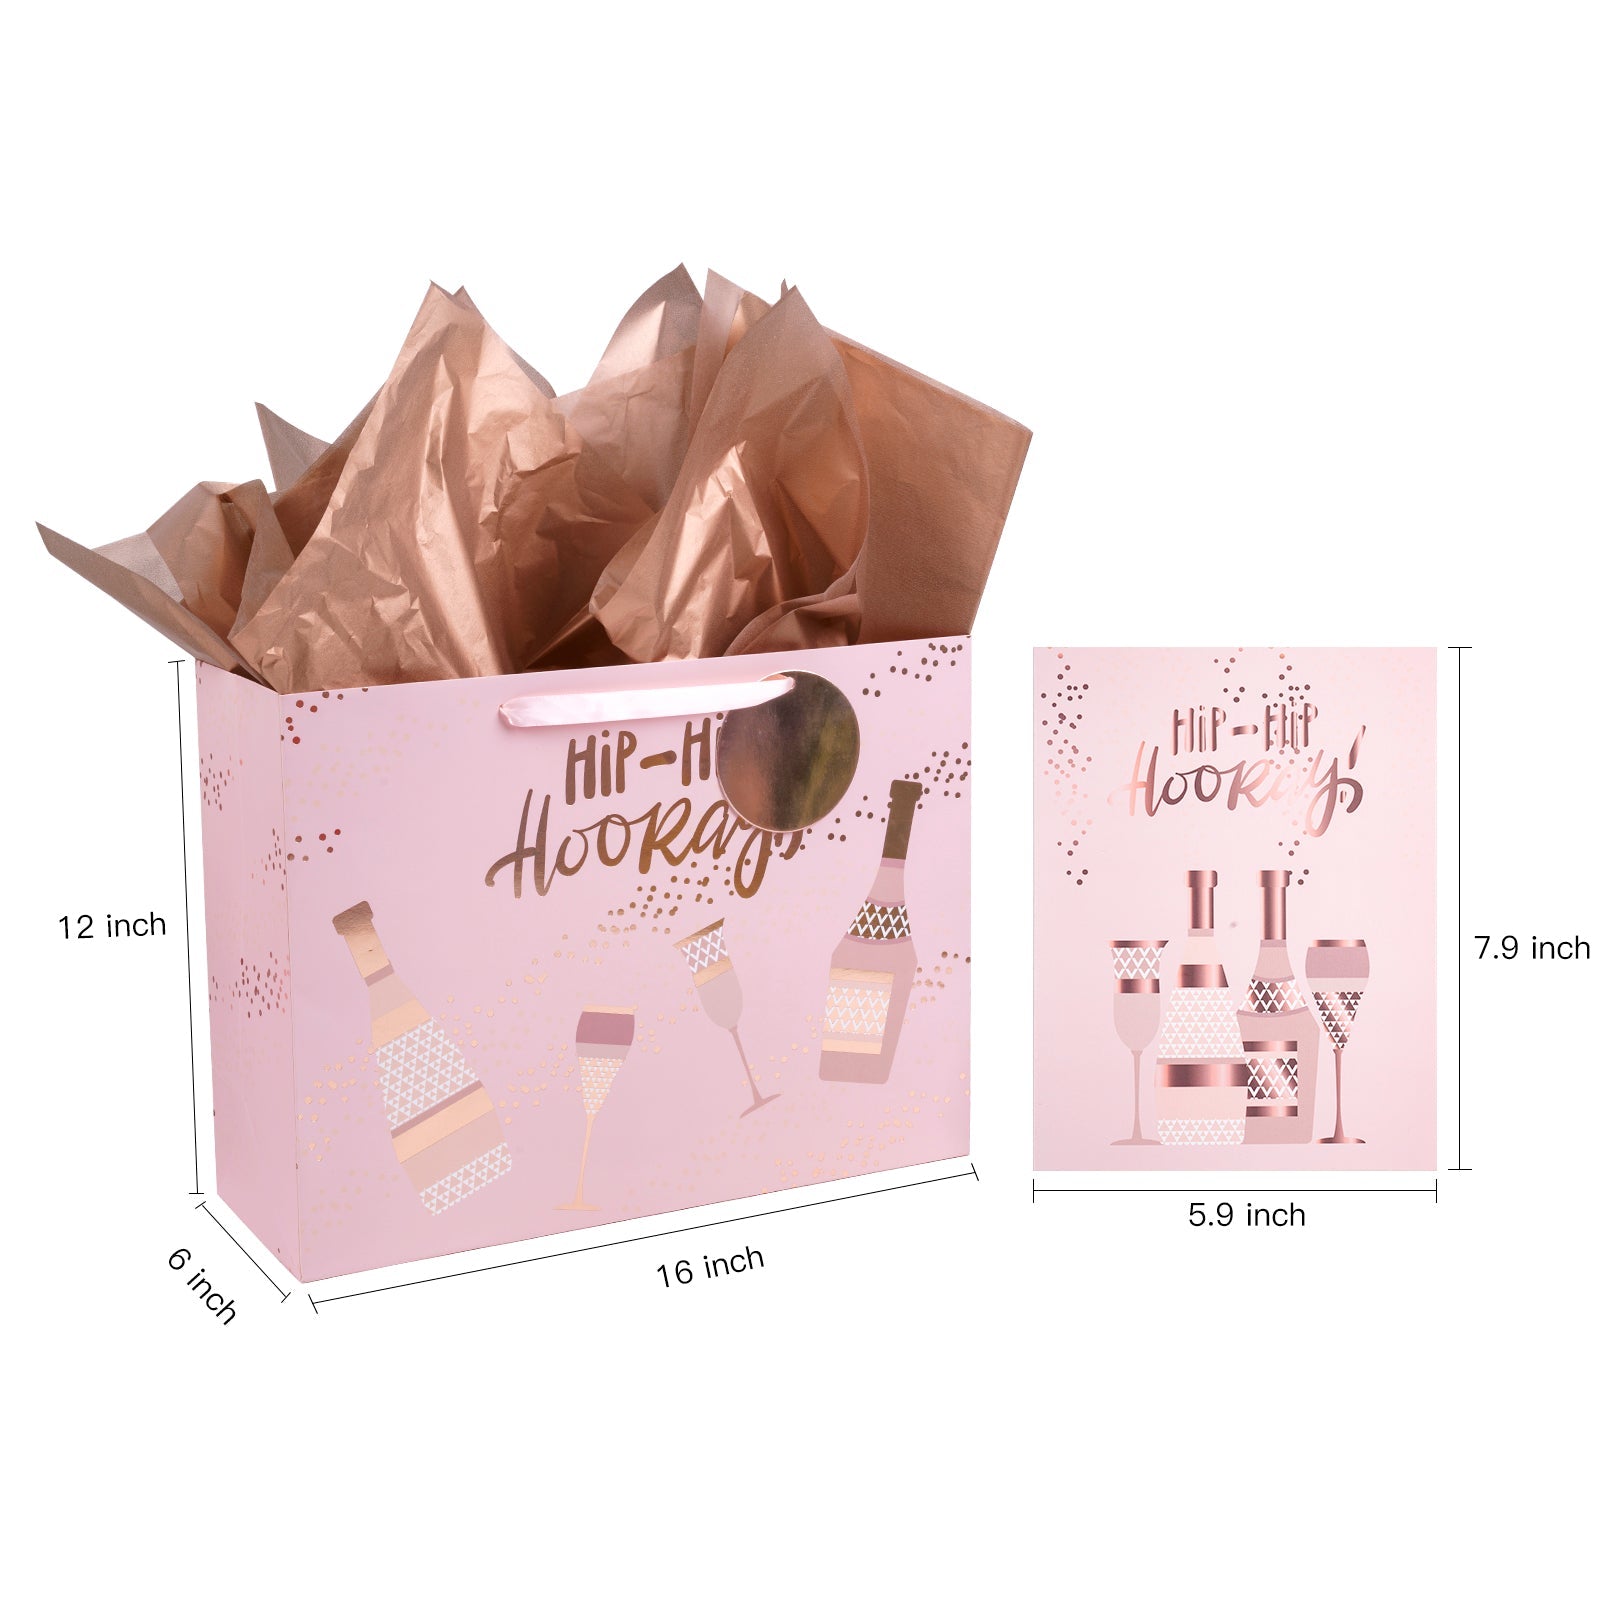 16 inch Extra Large Gift Bag with Gift Card  & Tissue Paper for Wedding/Anniversary